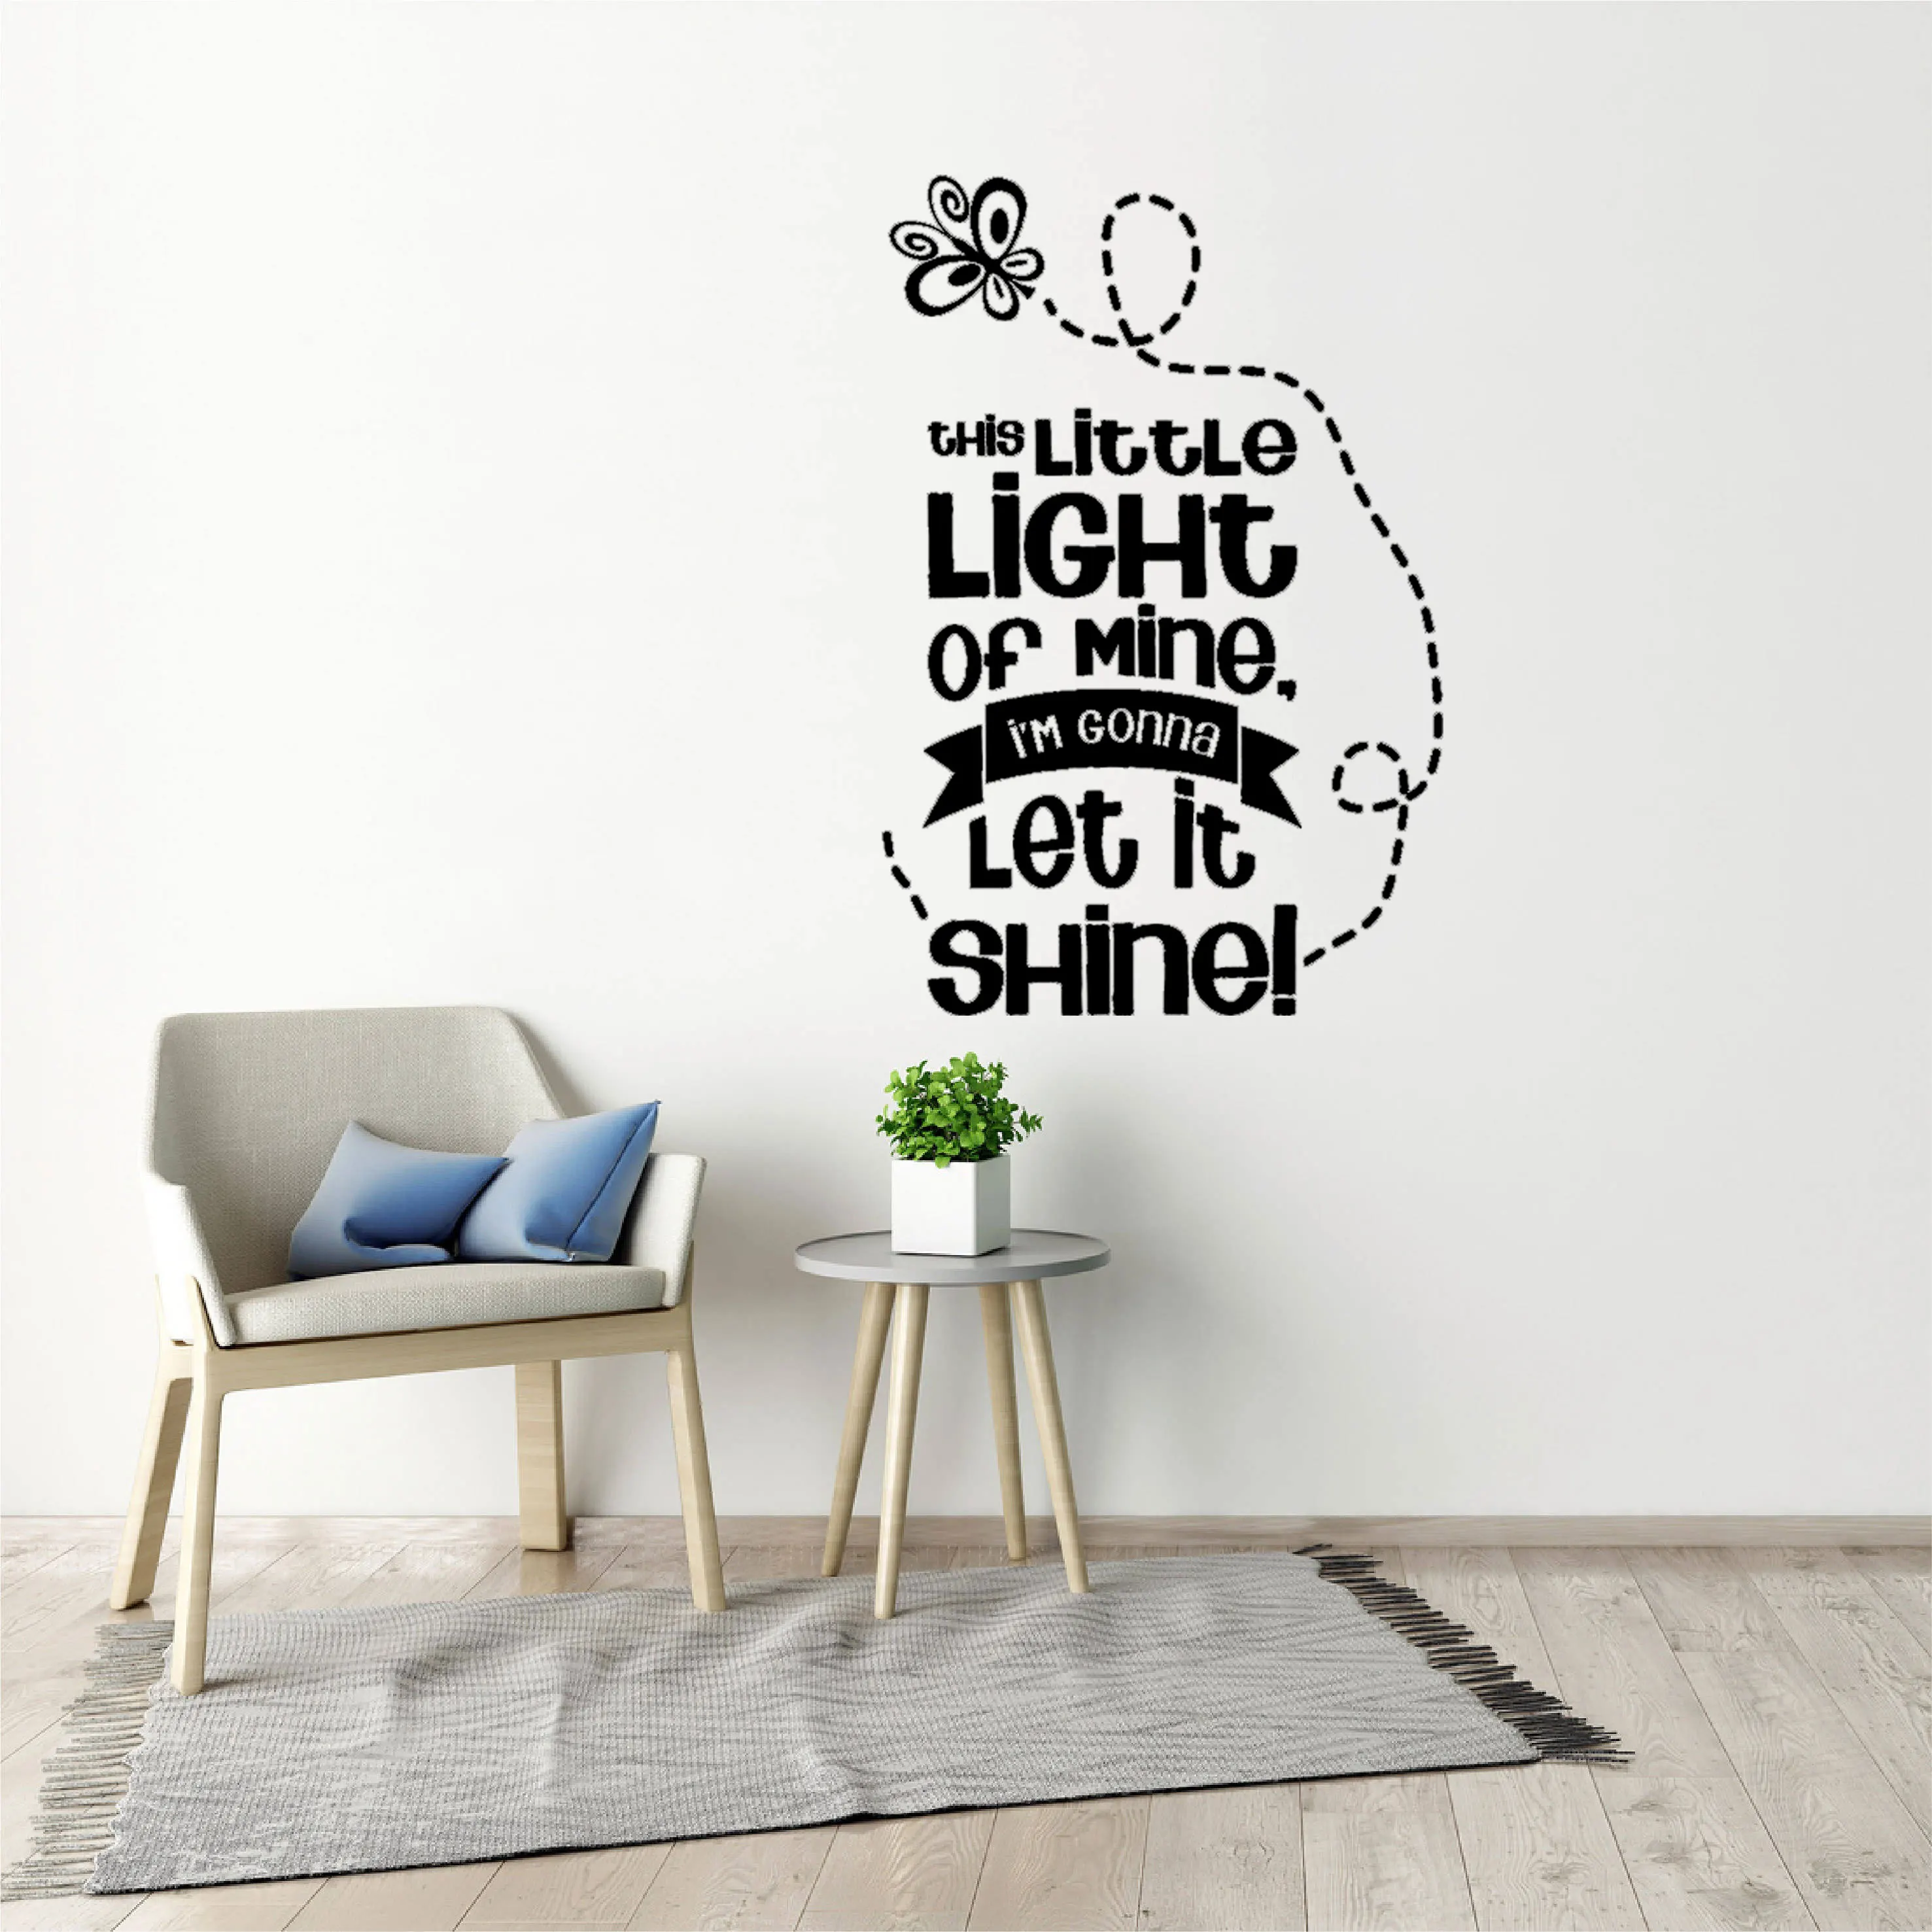 

this little light of mine, i'm gonna let it shine! Vinyl Wall Decal Quote Art Home Decor Wall Mural Stickers Girl Bedroom CX2167